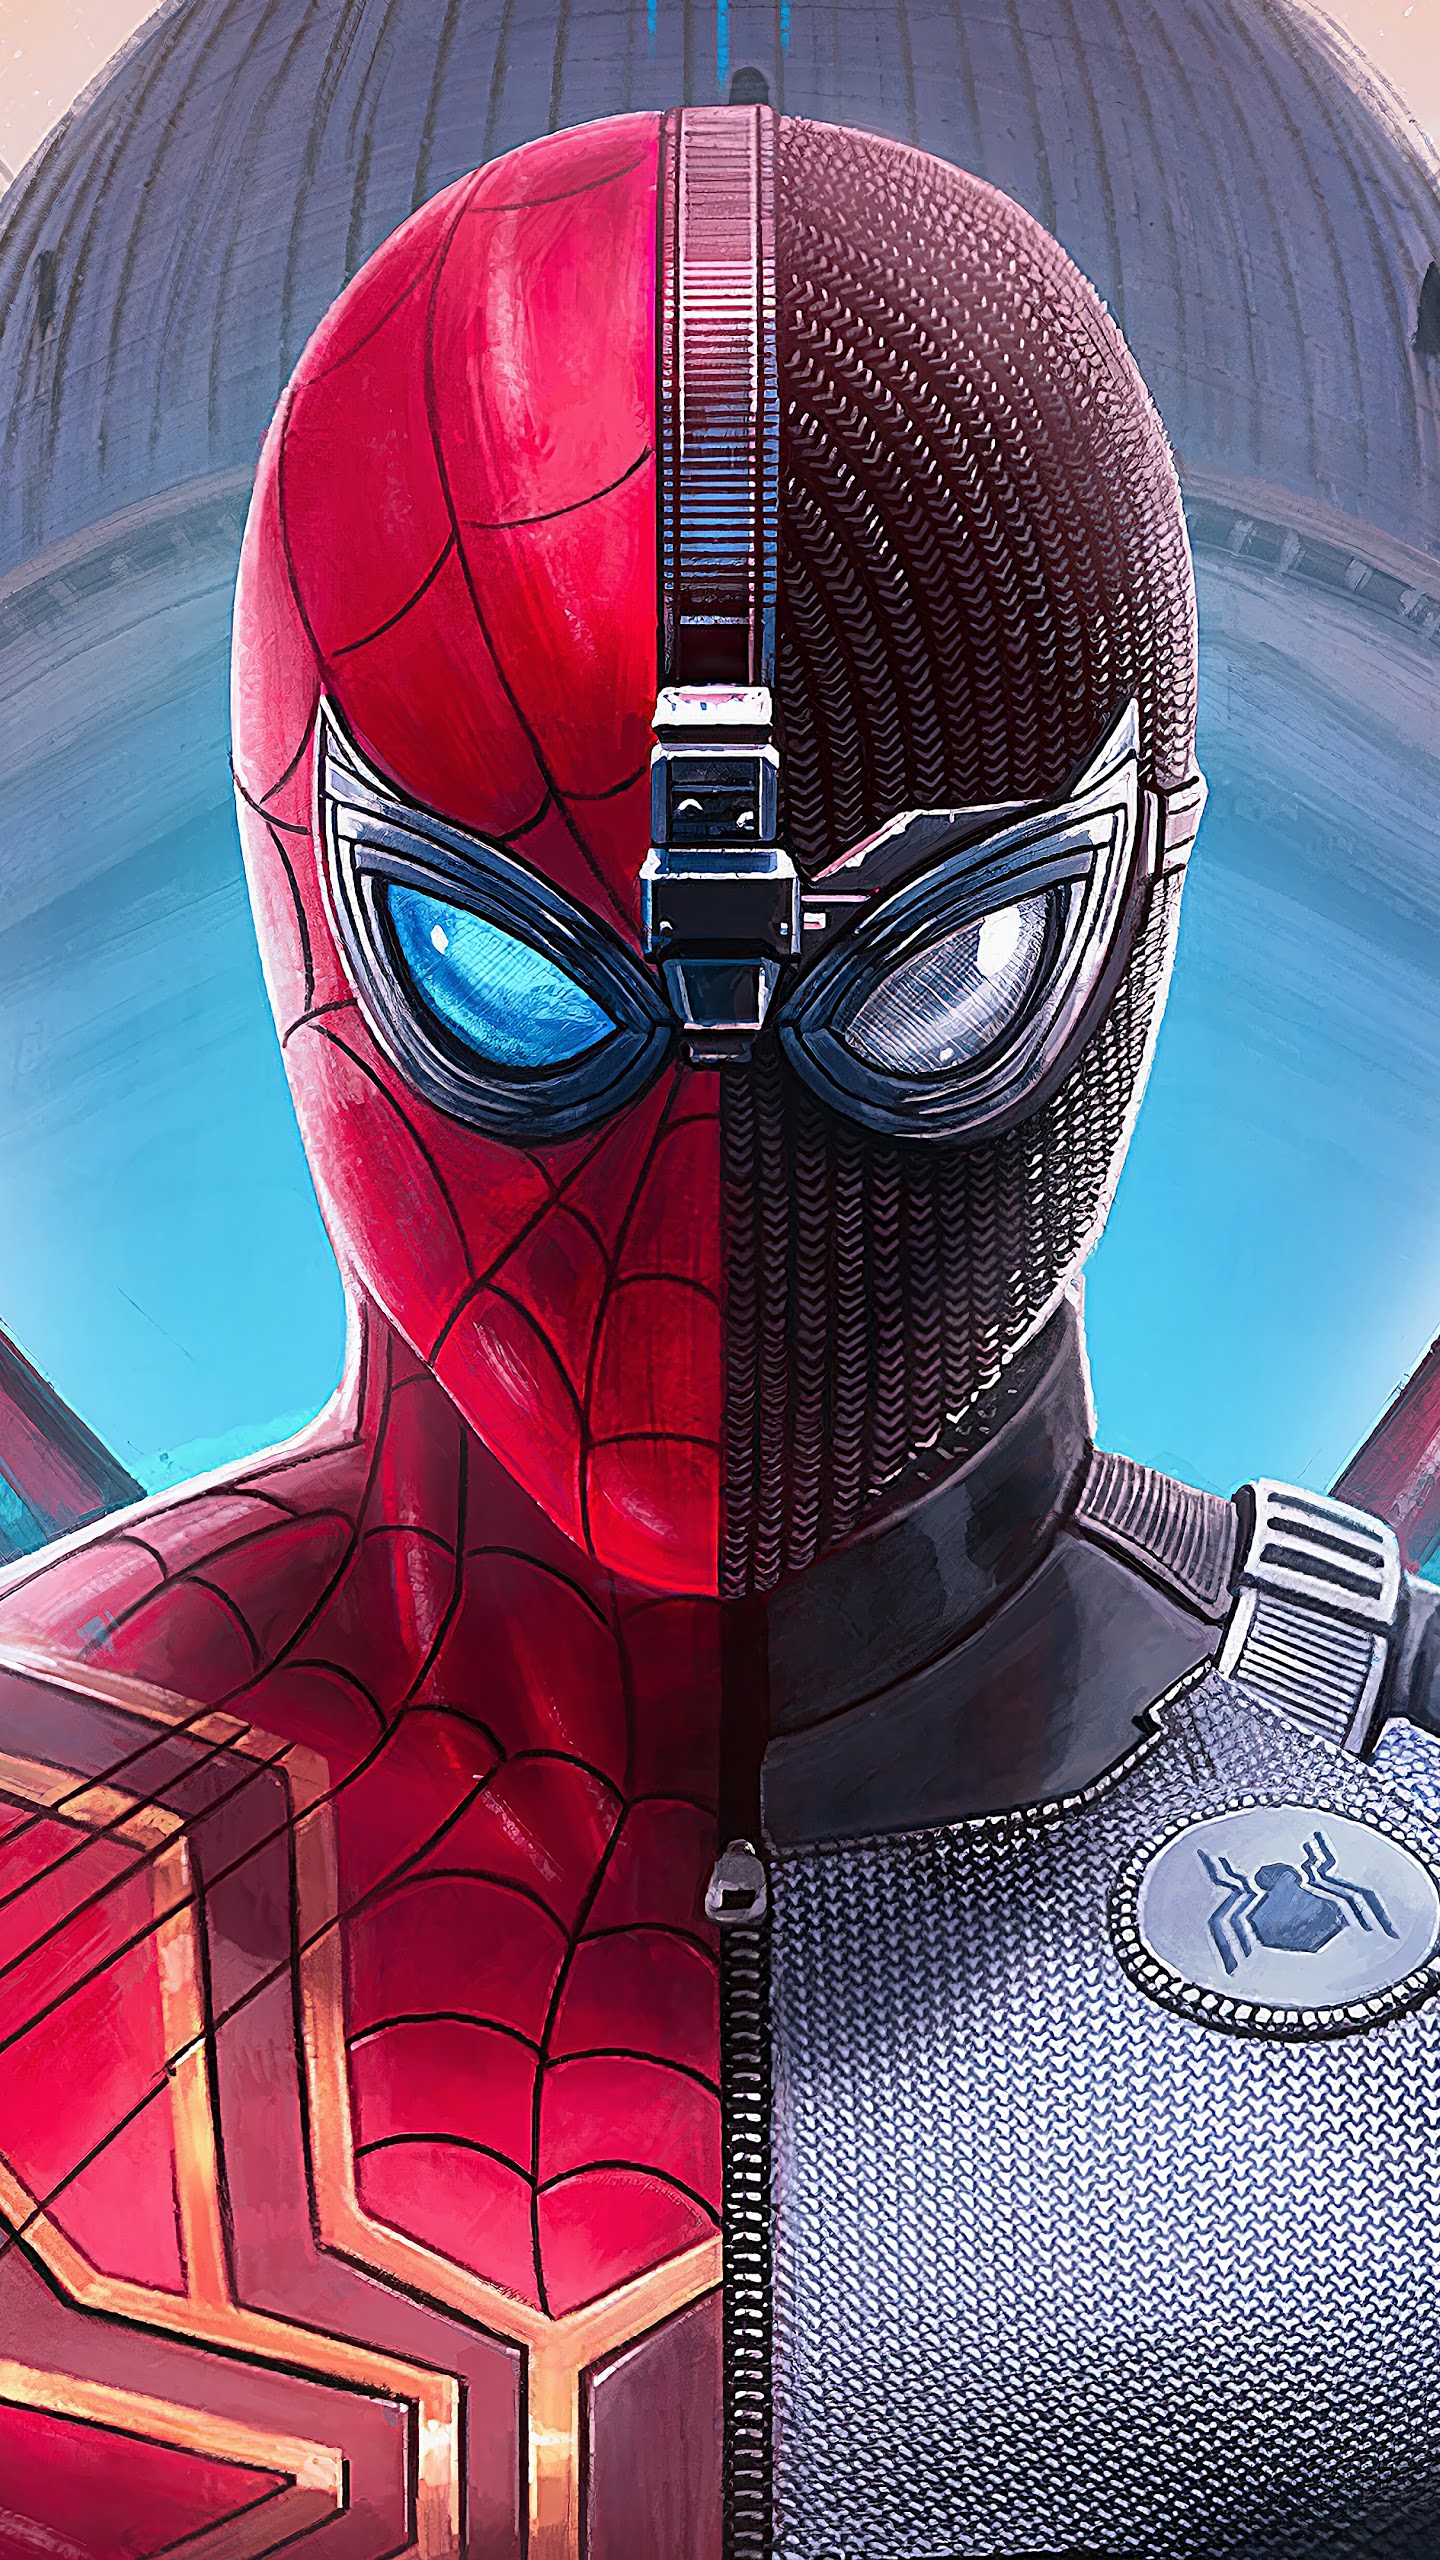 Spider-man Far From Home, Iron Spider, Stealth Suit, - Spider Man Far From Home Extended Cut - HD Wallpaper 